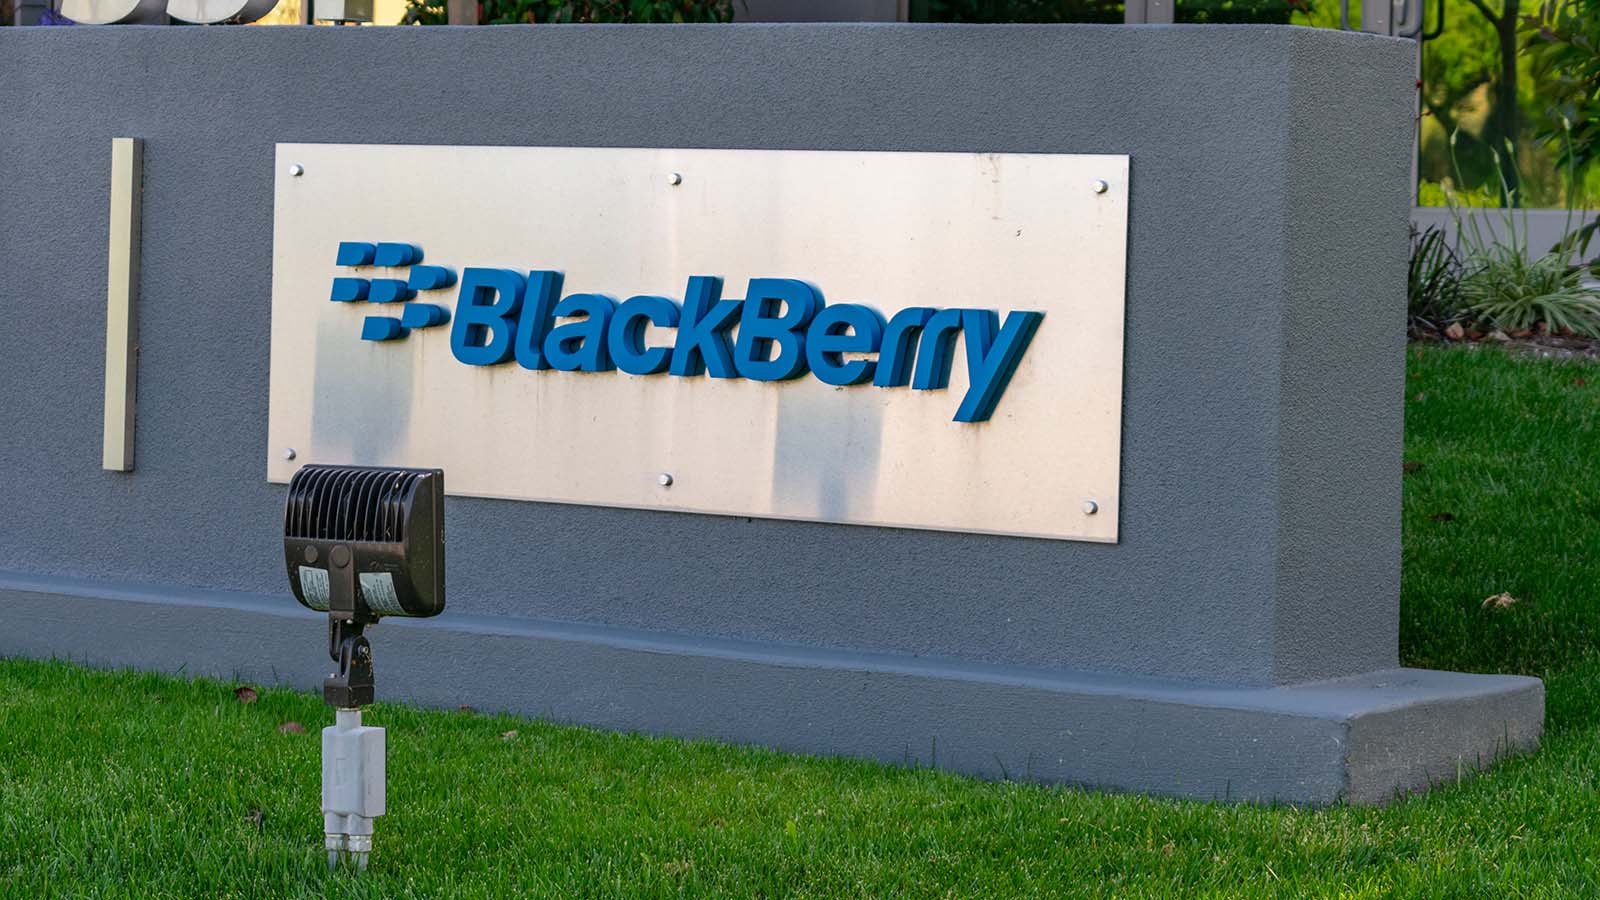 Blackberry Stock Will Likely Be Volatile Prior to Q4 Earnings